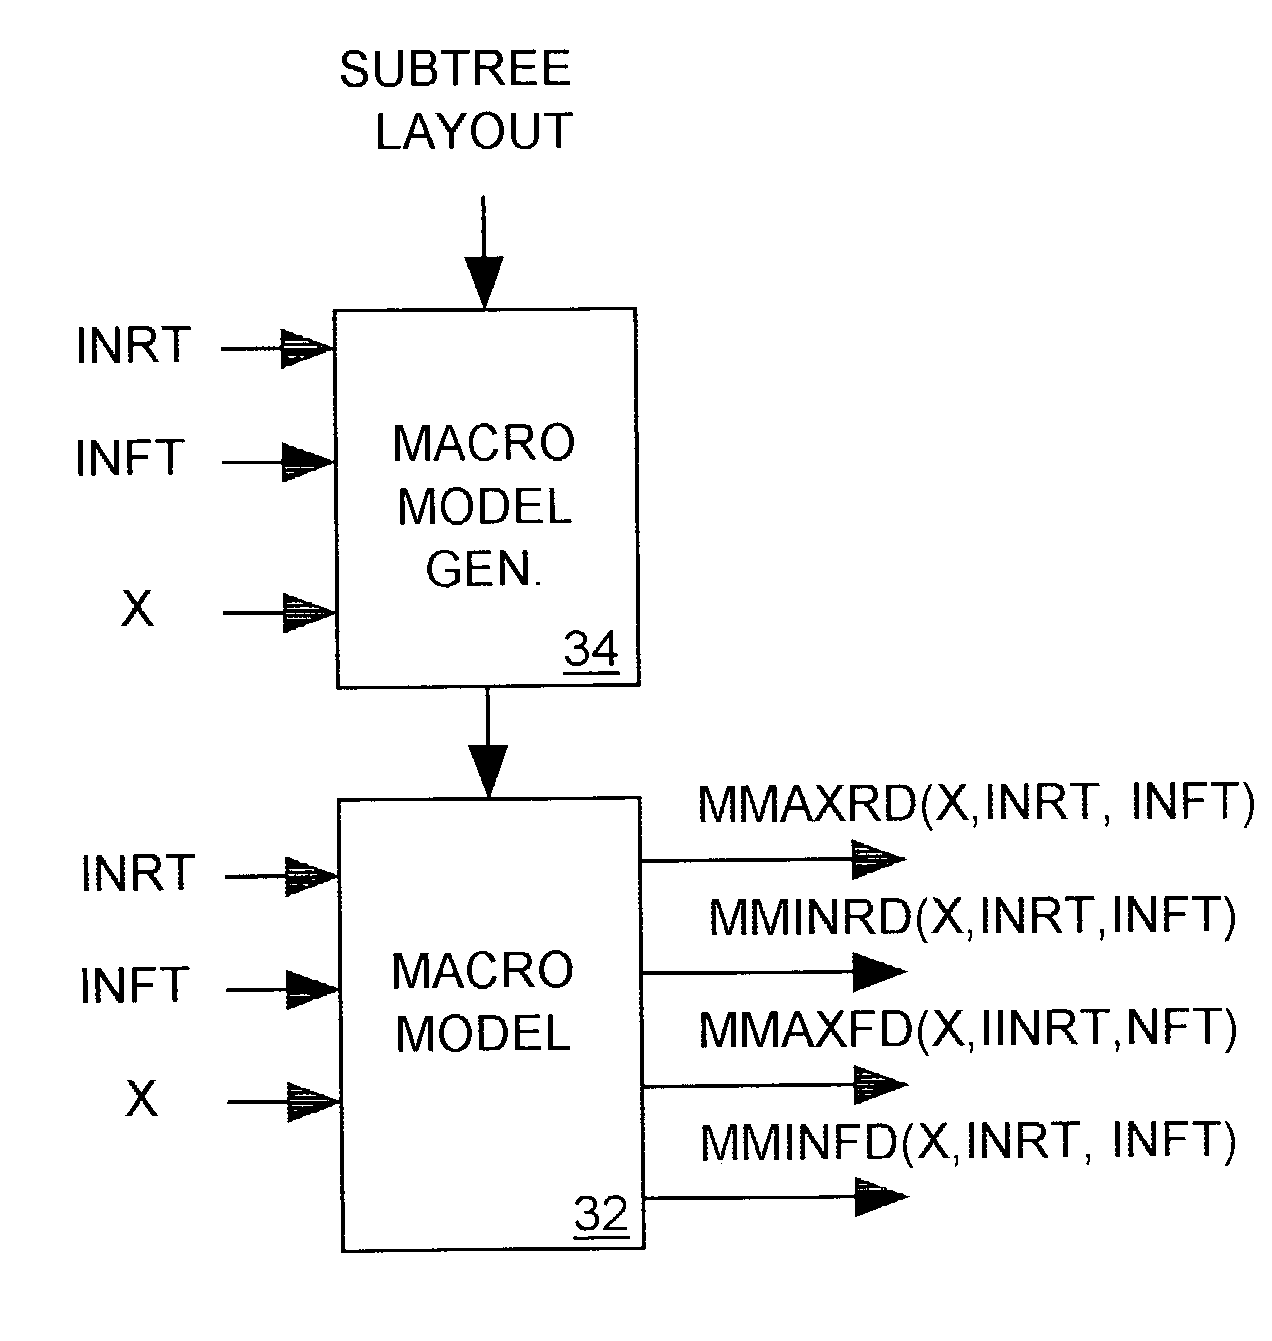 Method for analyzing path delays in an IC clock tree